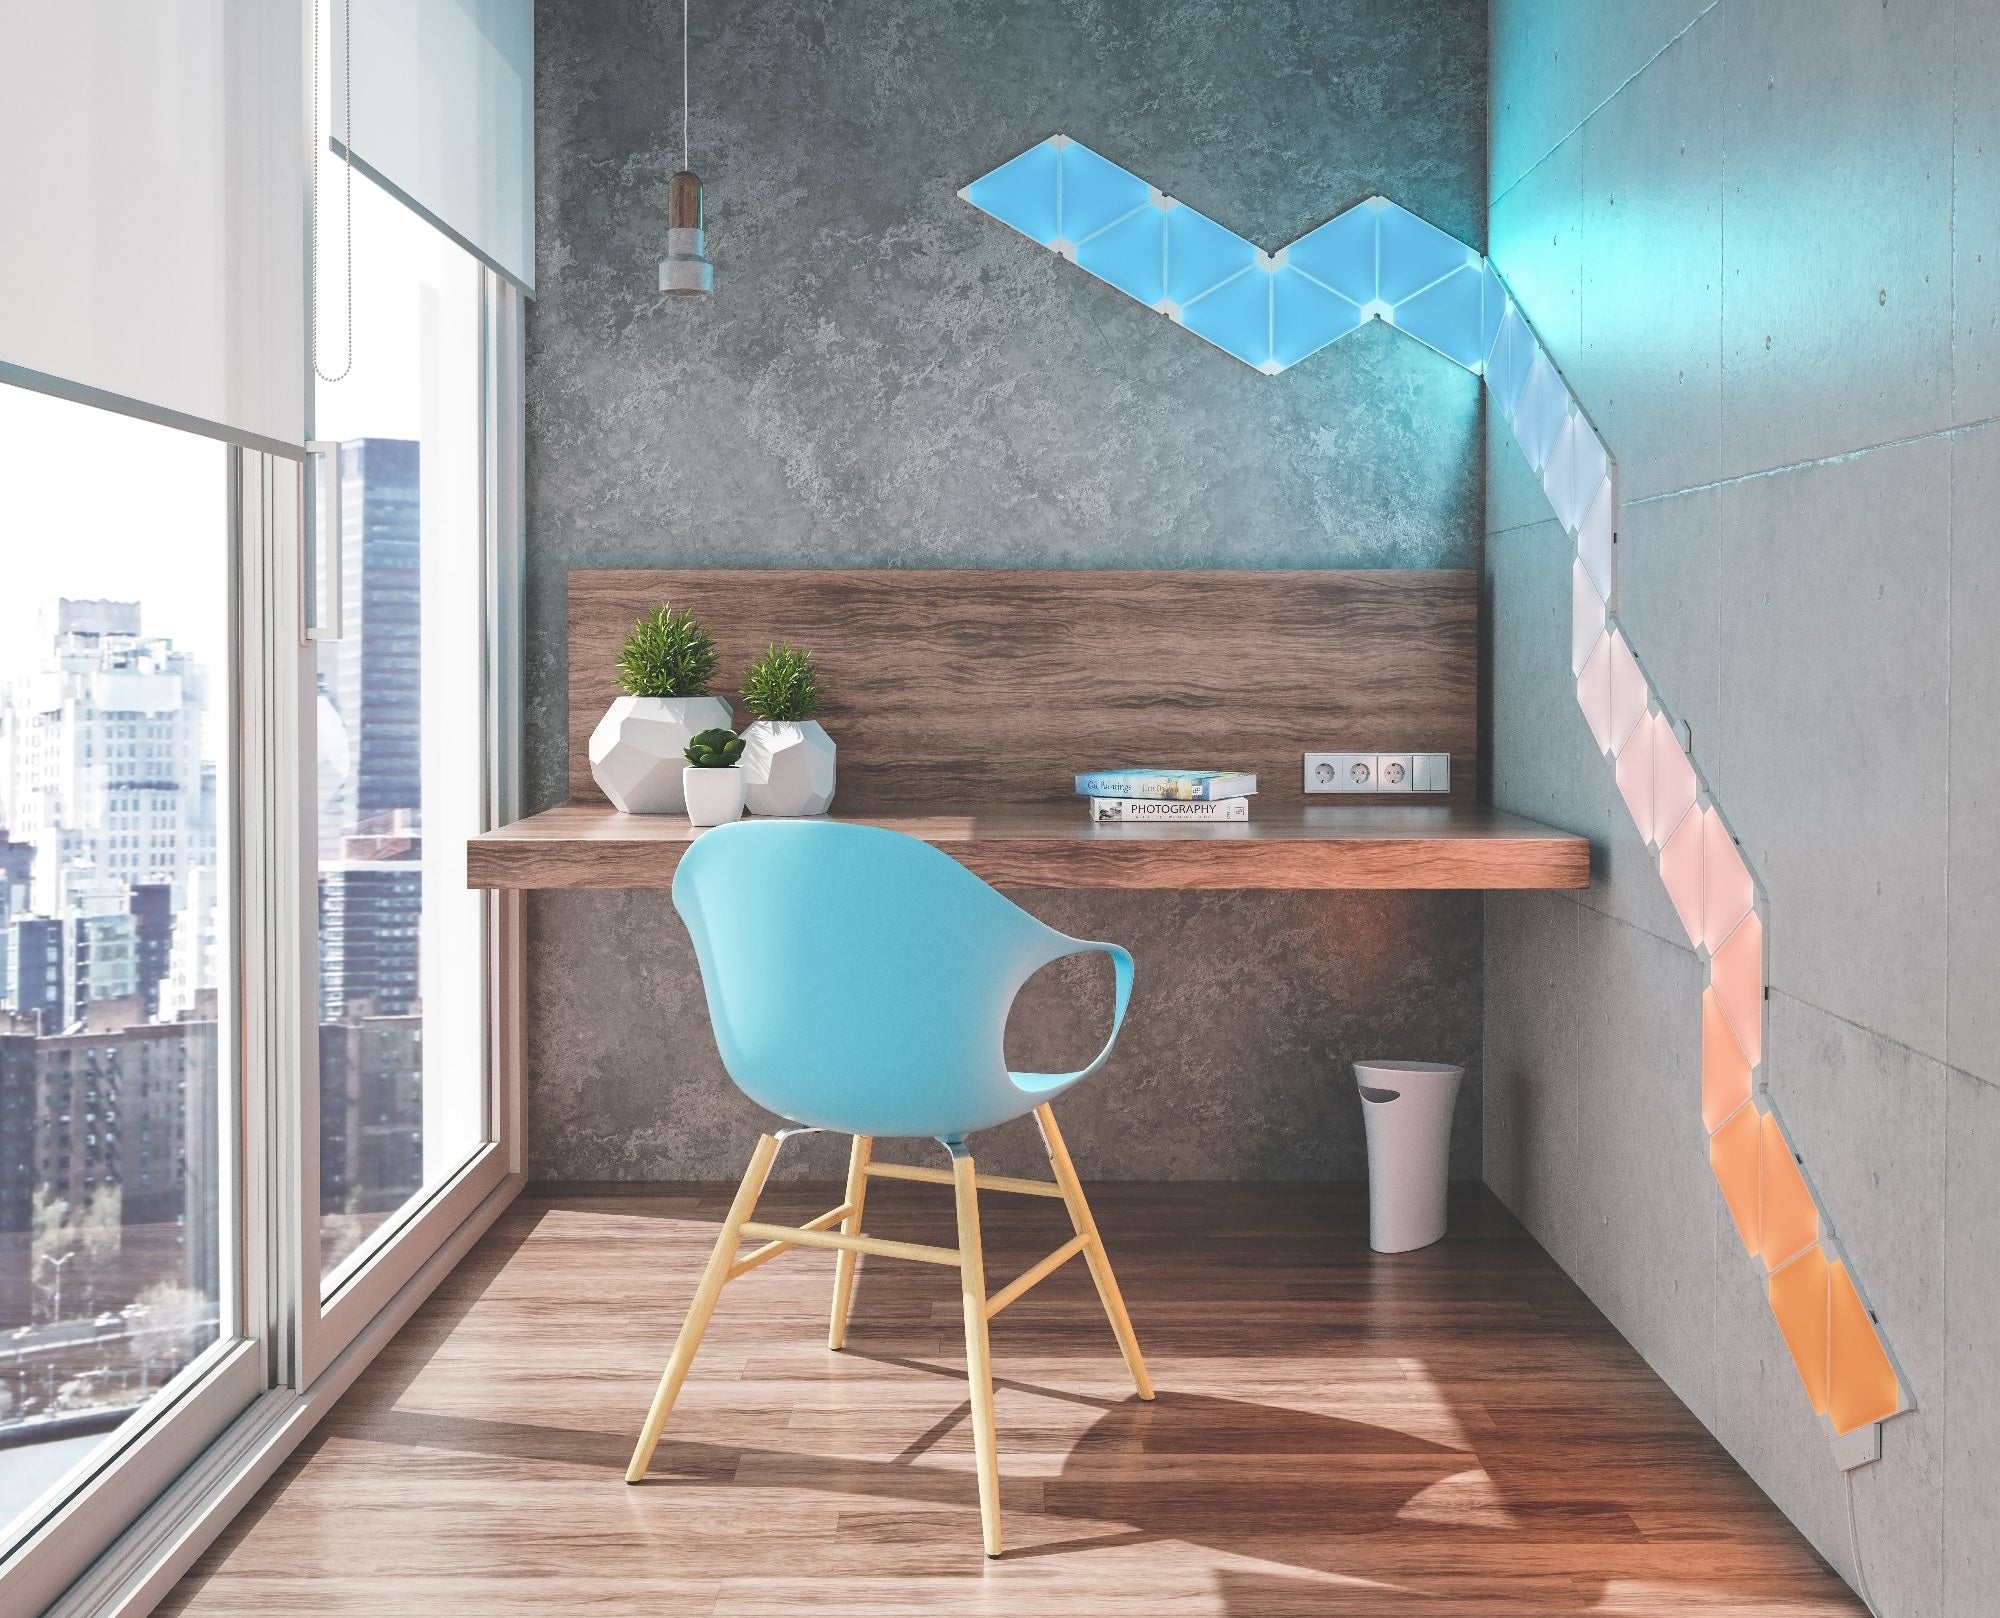 NanoLeaf light-up panels featured on a wall in a home office accented with a light blue chair